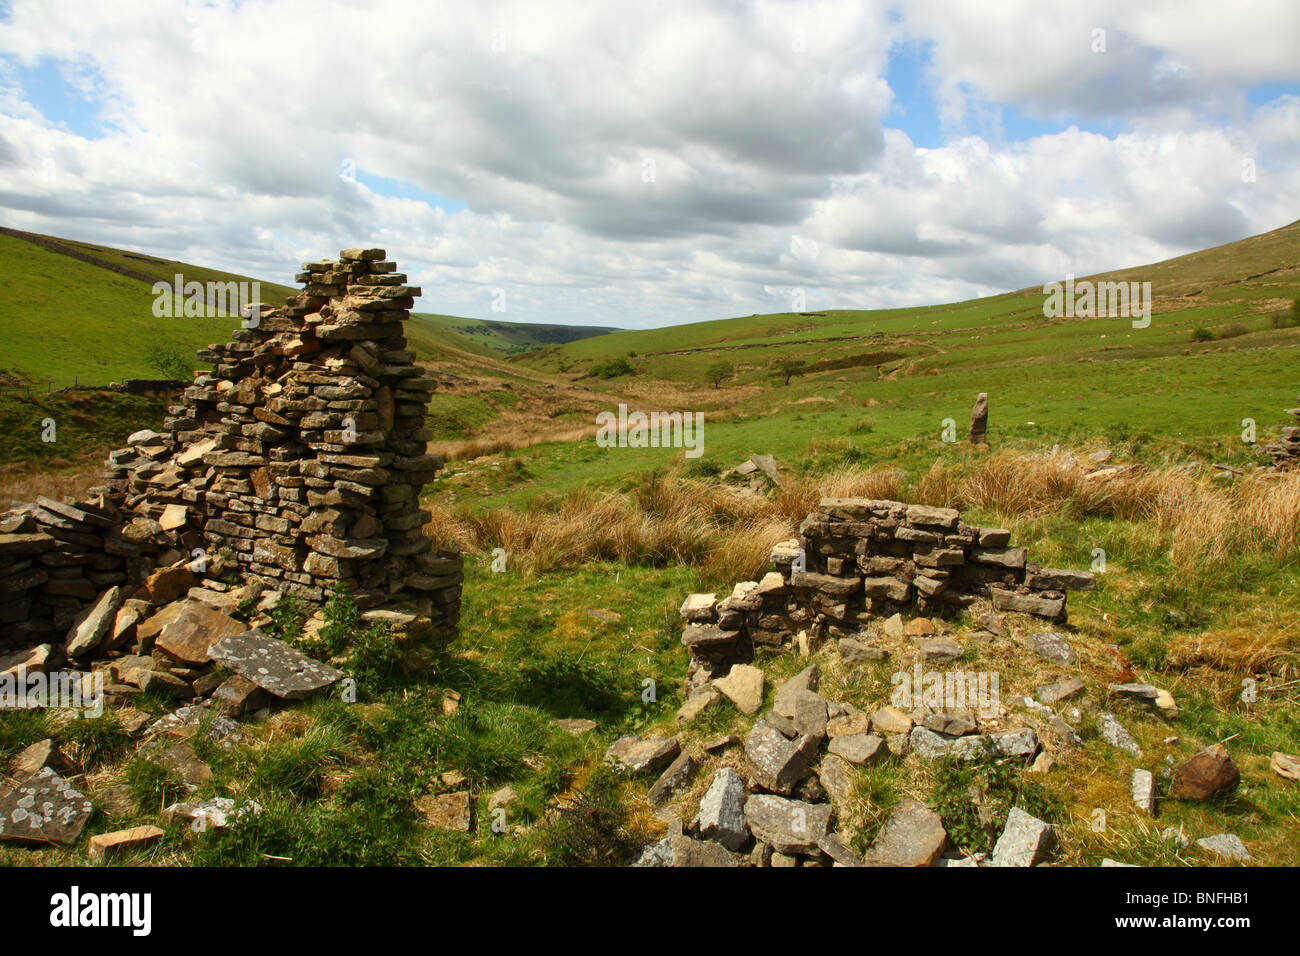 The ruins at Thursbitch,Peak district national park,Cheshire,England,UK. Stock Photo